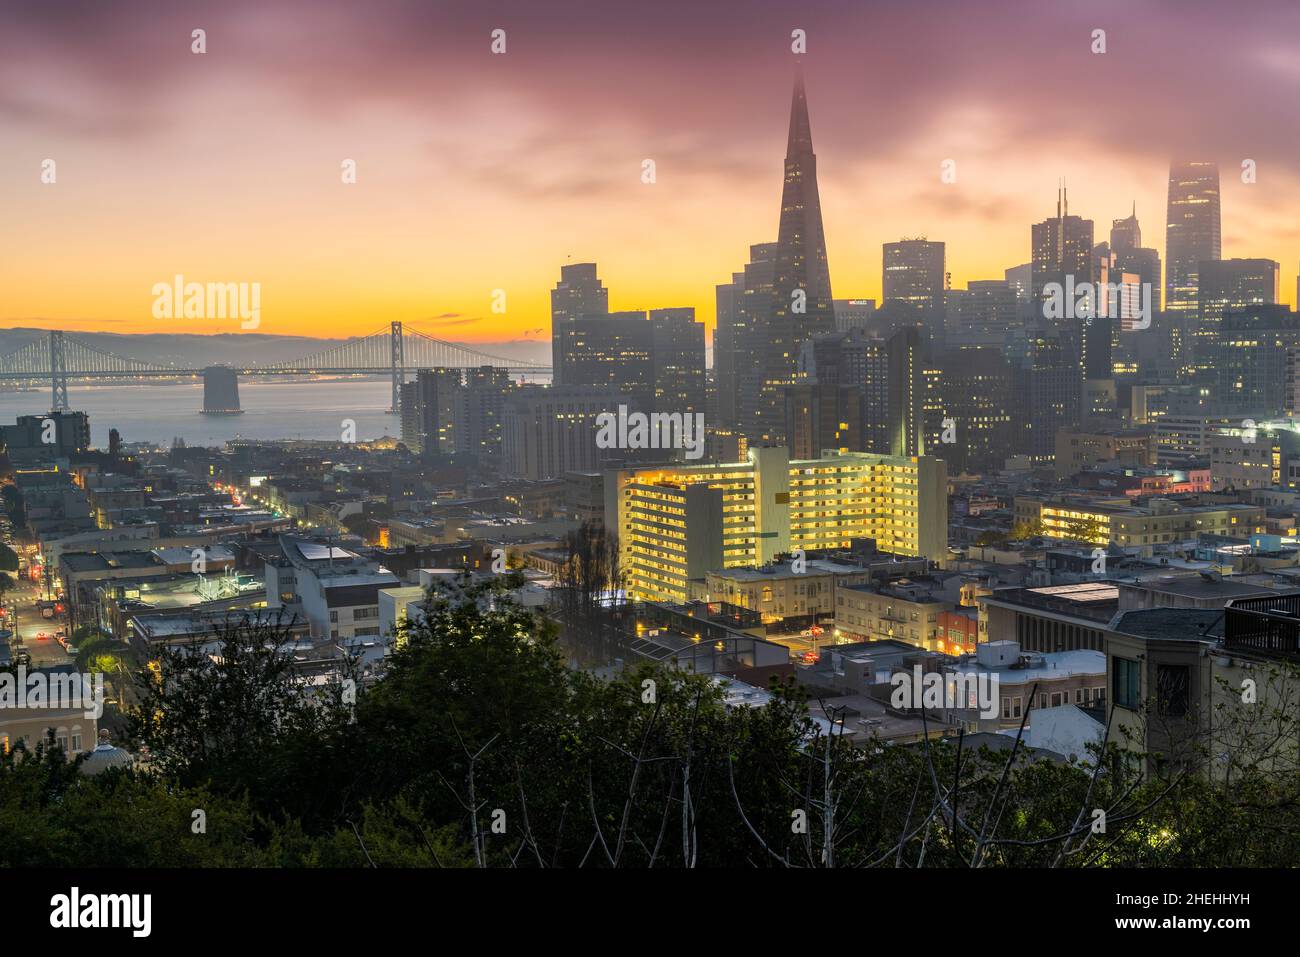 Misty sunrise over downtown with Bay Bridge in the background, San Francisco, California, USA Stock Photo